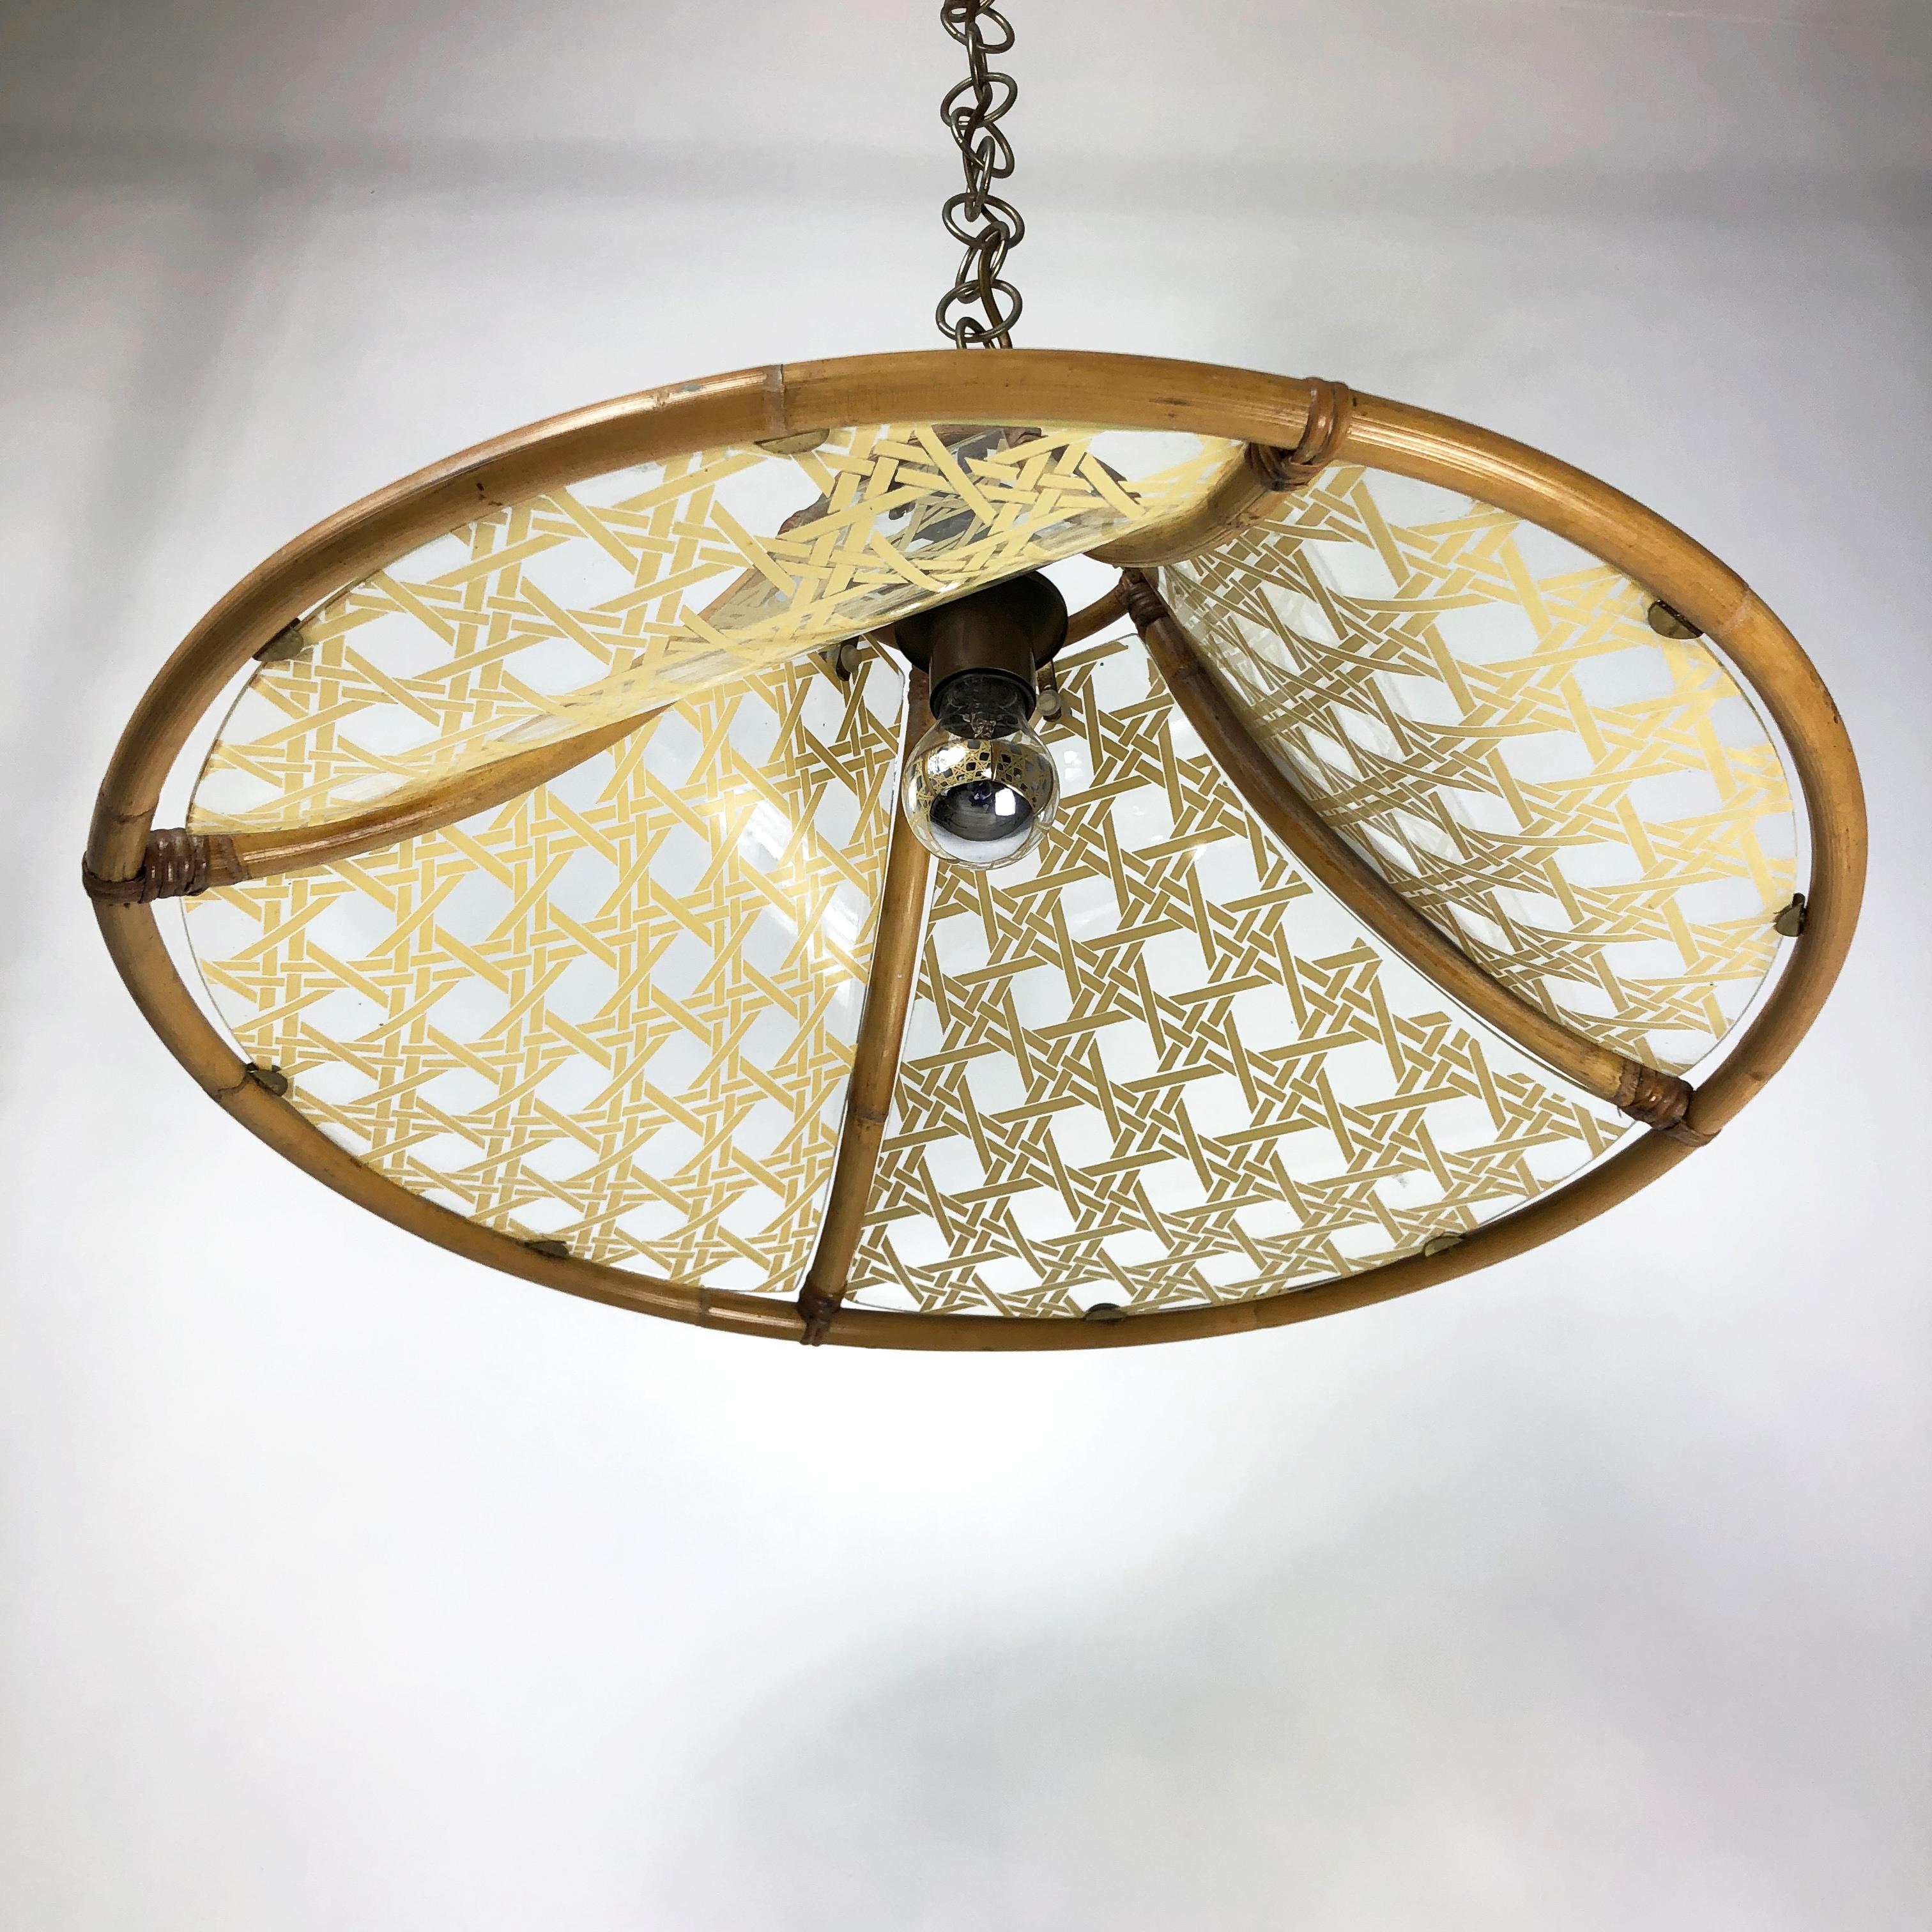 Italian Chandelier in Bamboo, Glass and Rattan, Metal Pendant, Italy, 1960s For Sale